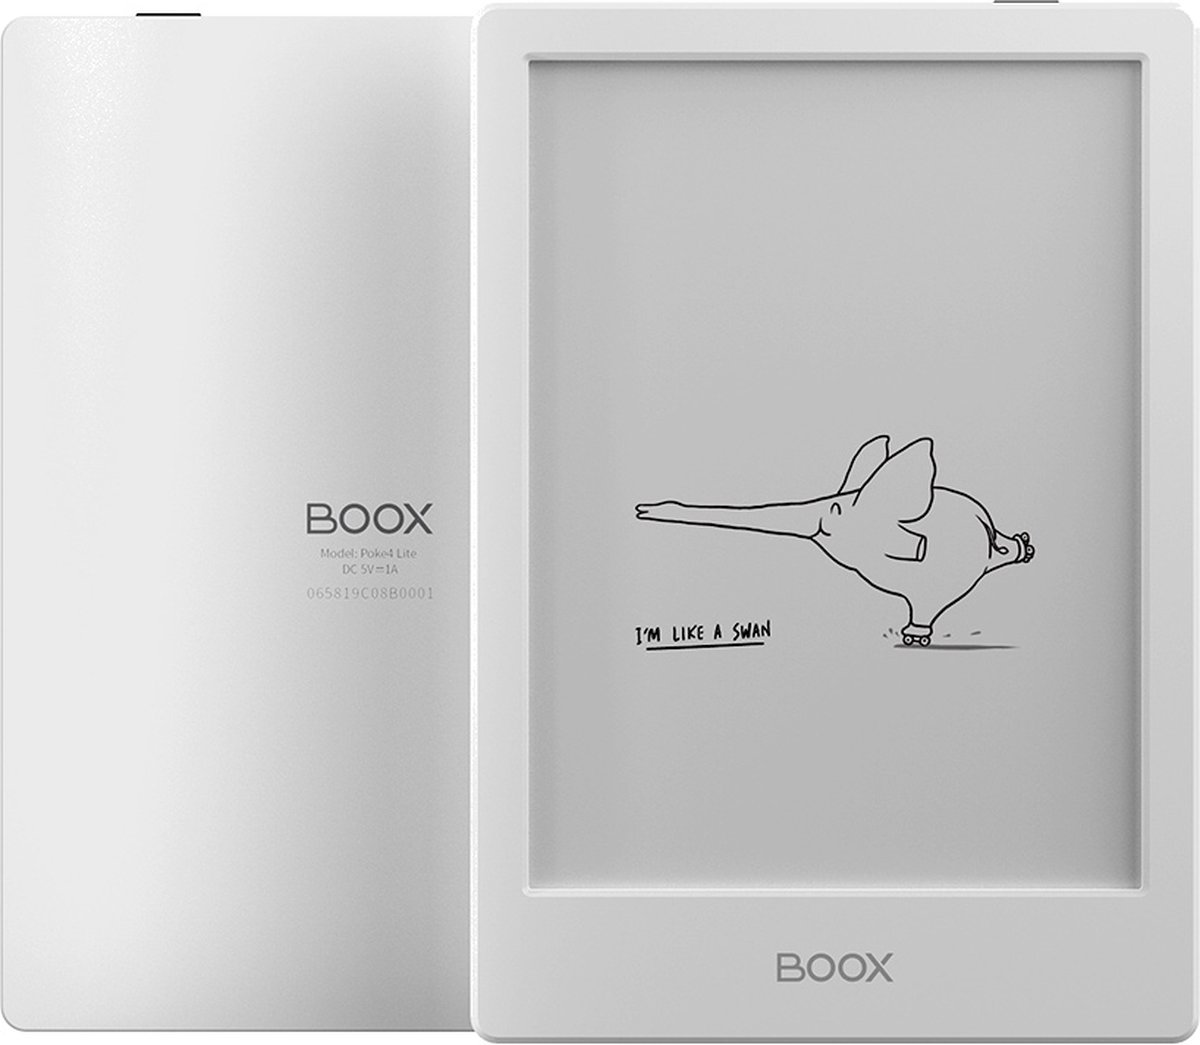 Onyx Boox Poke4 Lite - 6" e-inkt e-reader - Wit - Android 11, Play Store